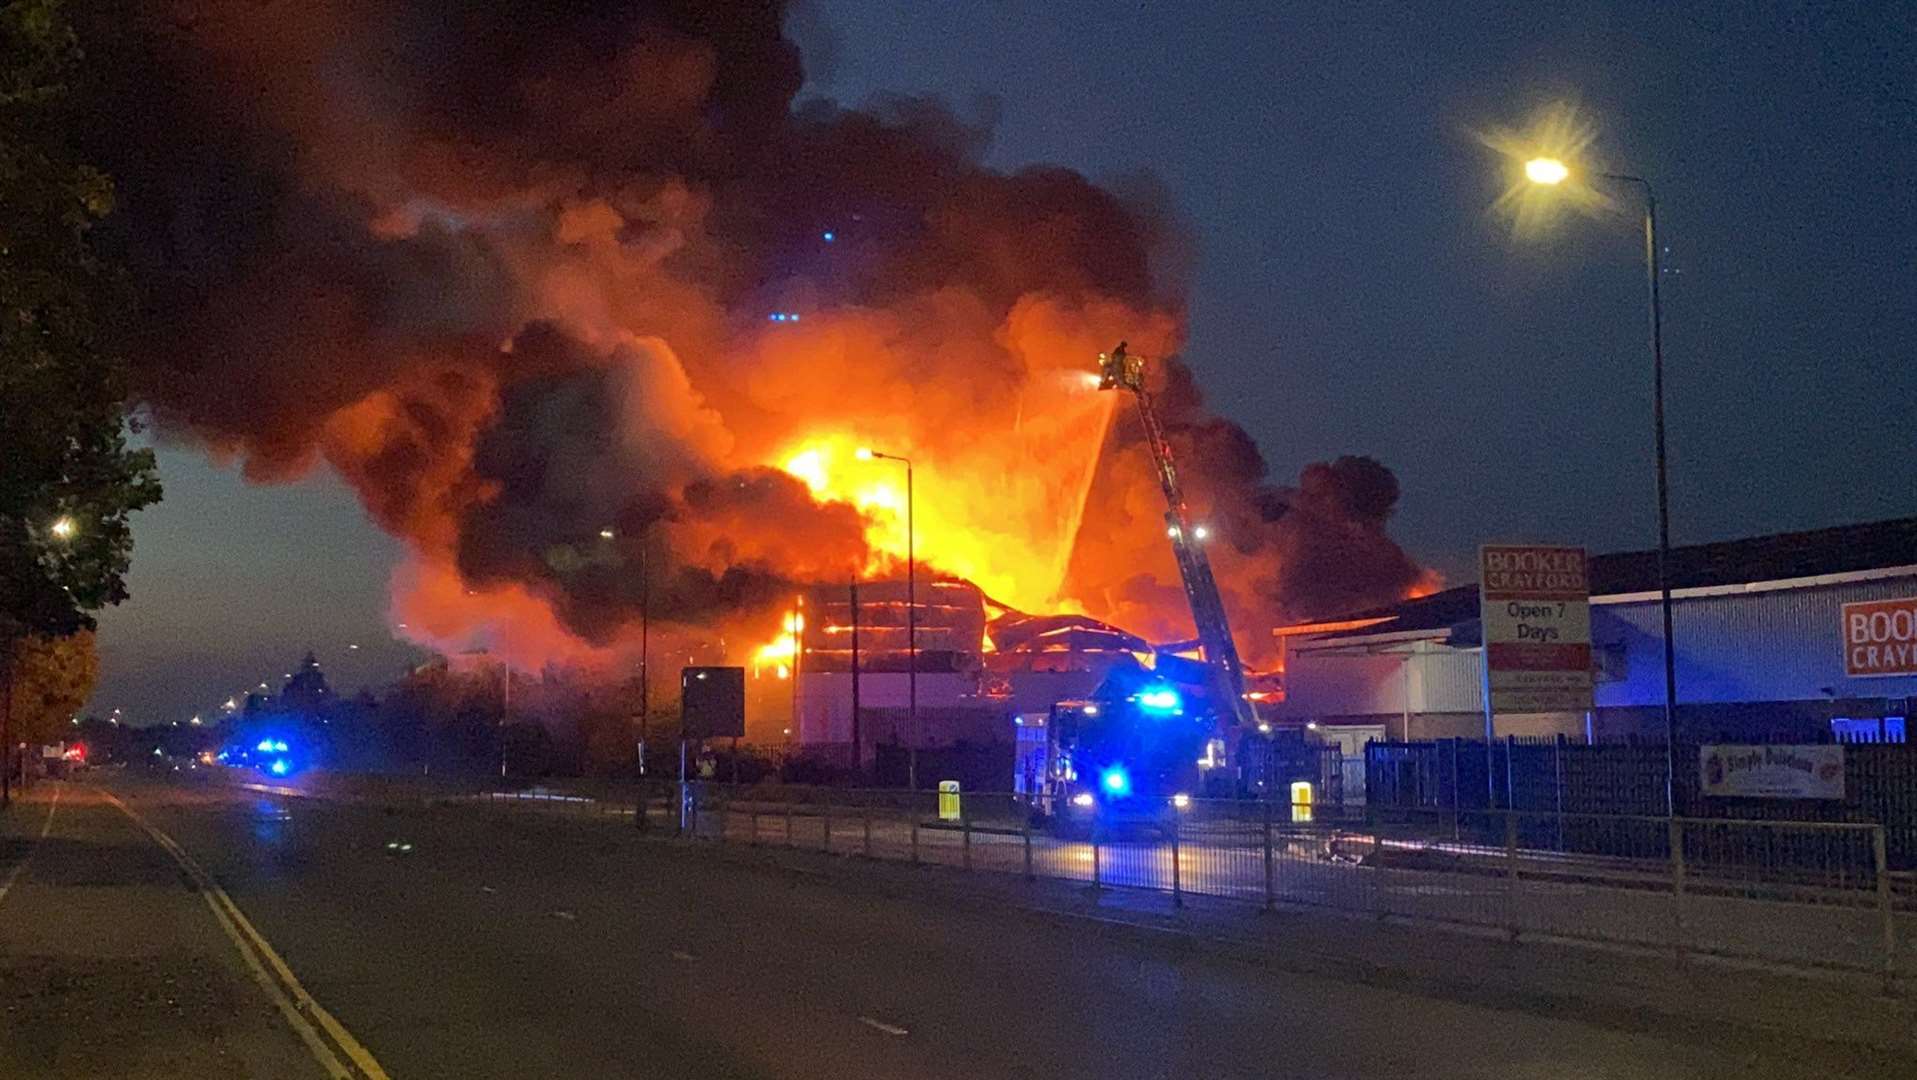 More than 100 firefighters tackled the blaze on the Optima Park, near Dartford. Photo: Graham Brown